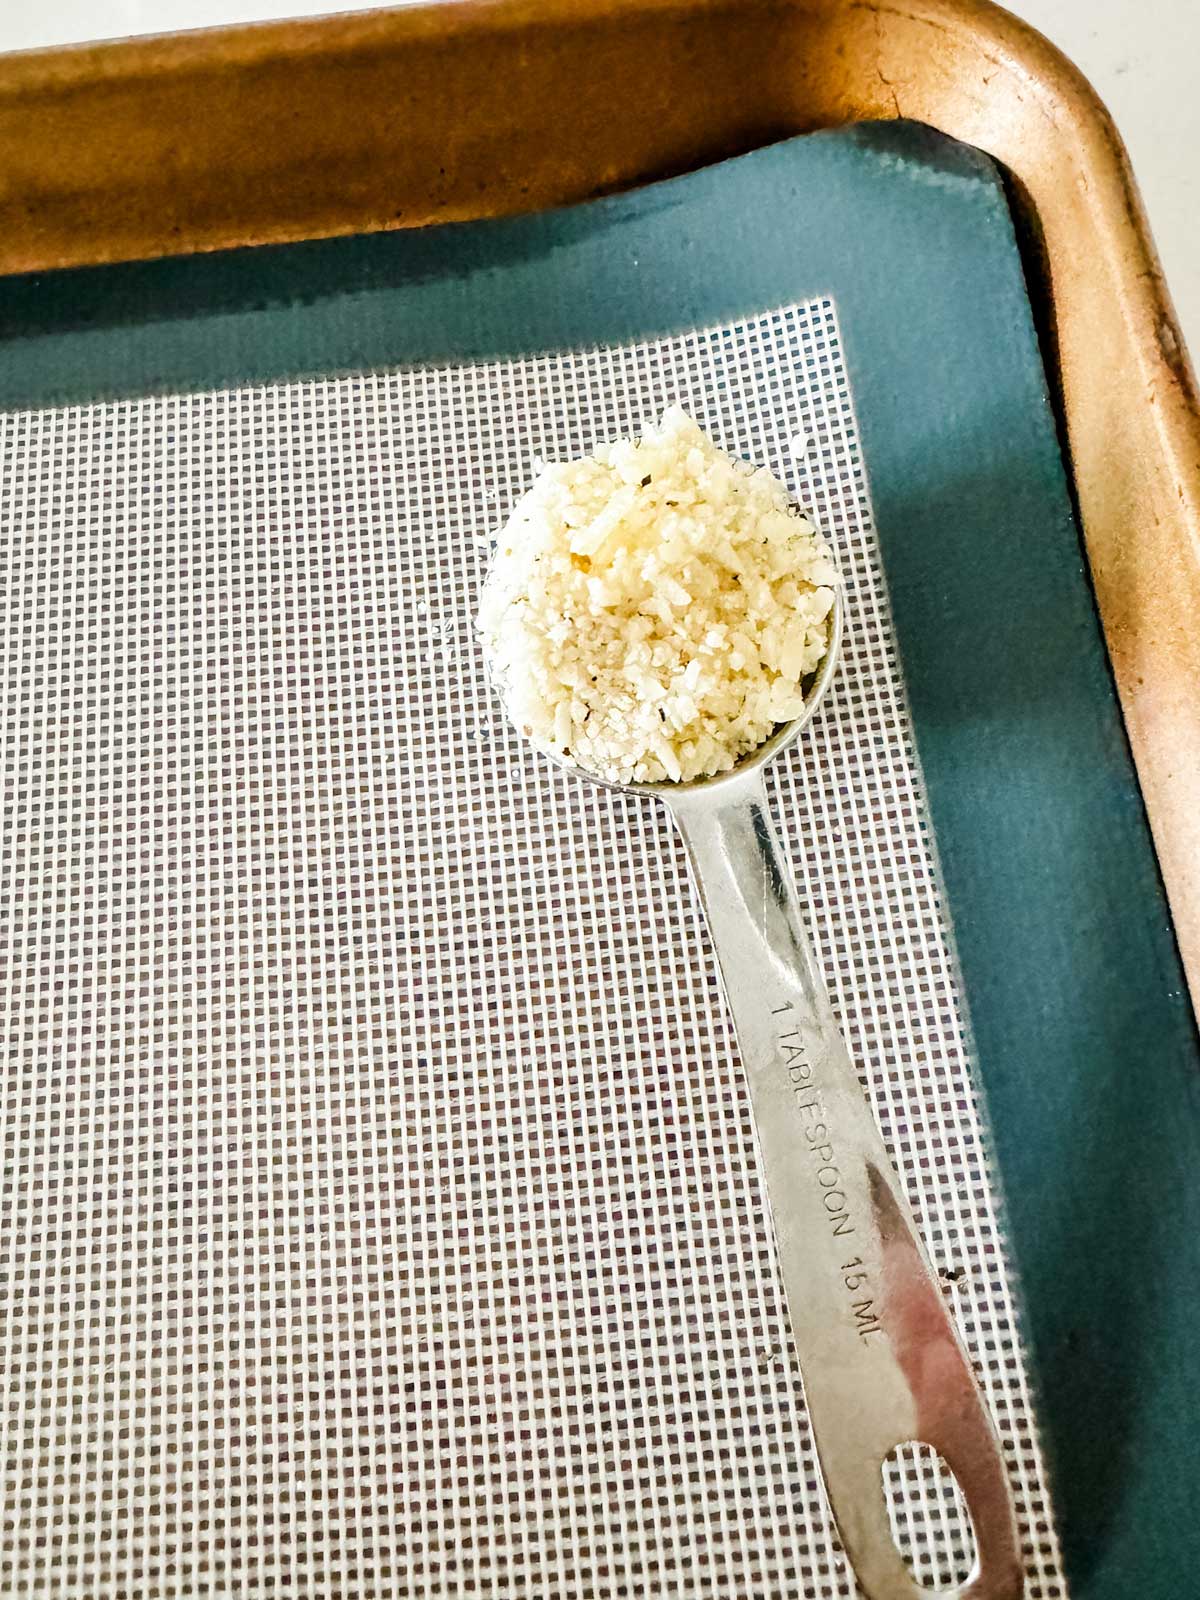 A tablespoon measure with finely grated parmesan, arrowroot and pepper.